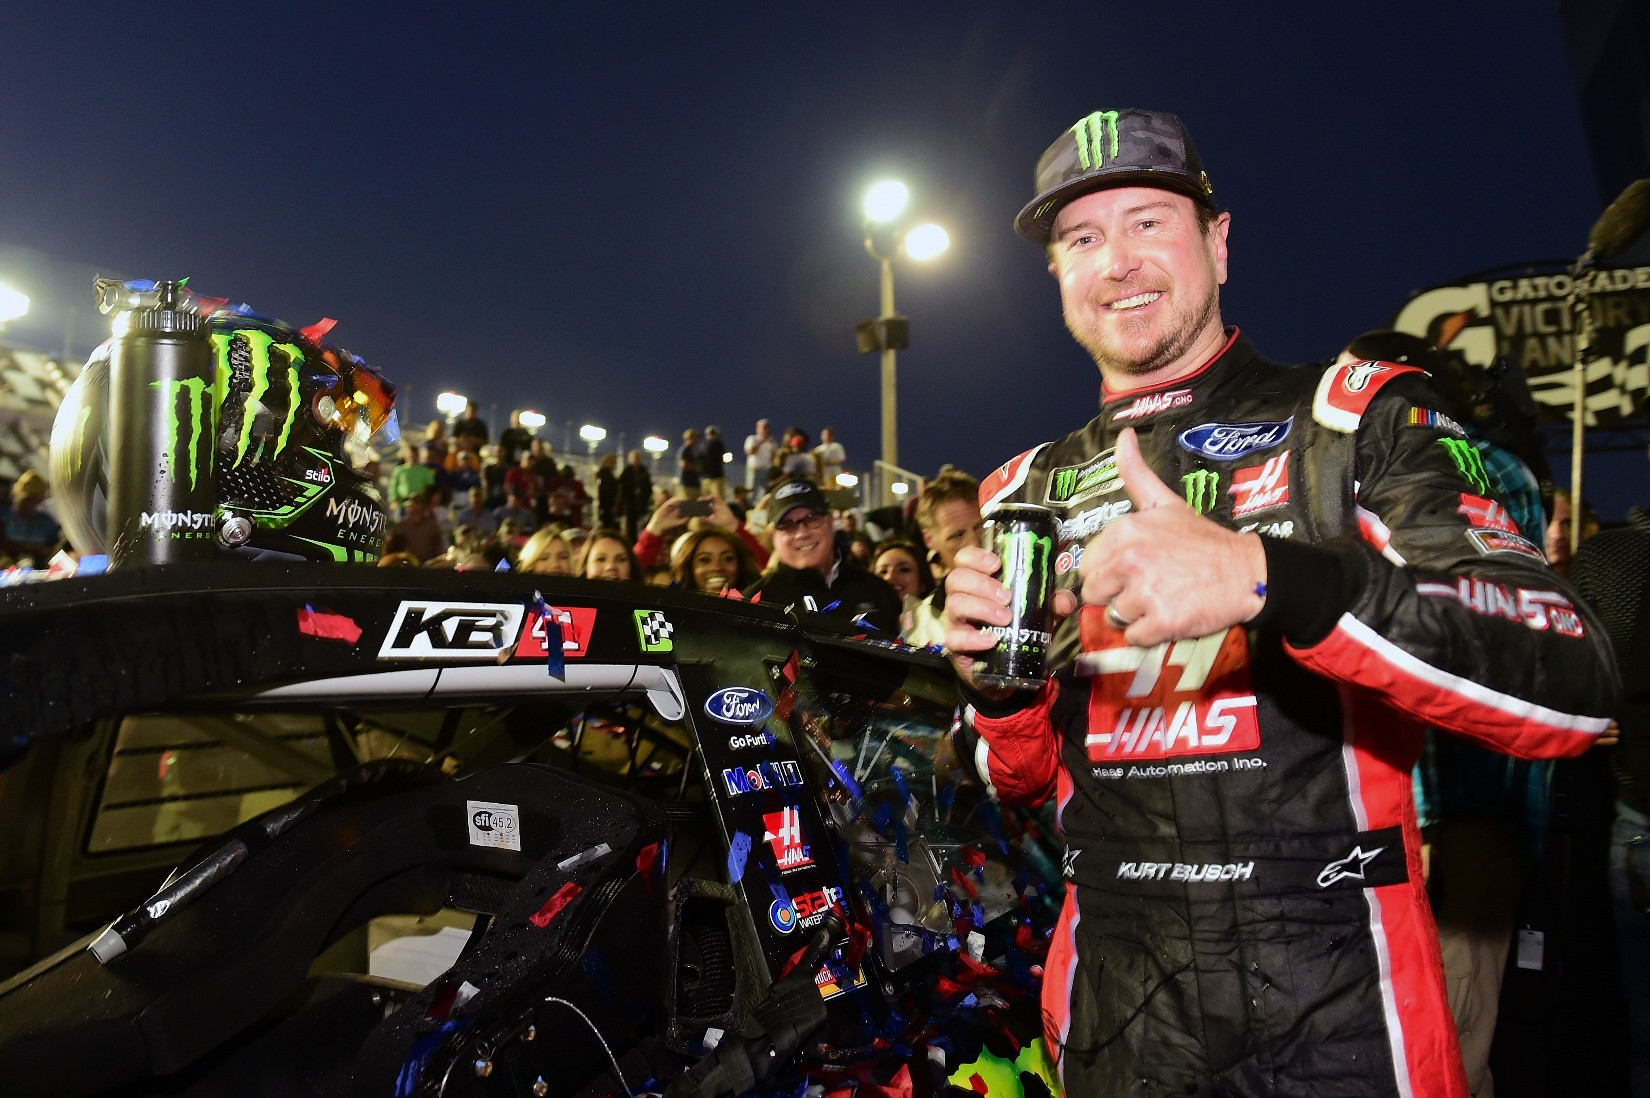 Kurt Busch. Photo by Jared Tilton/Getty Images, courtesy AFT.